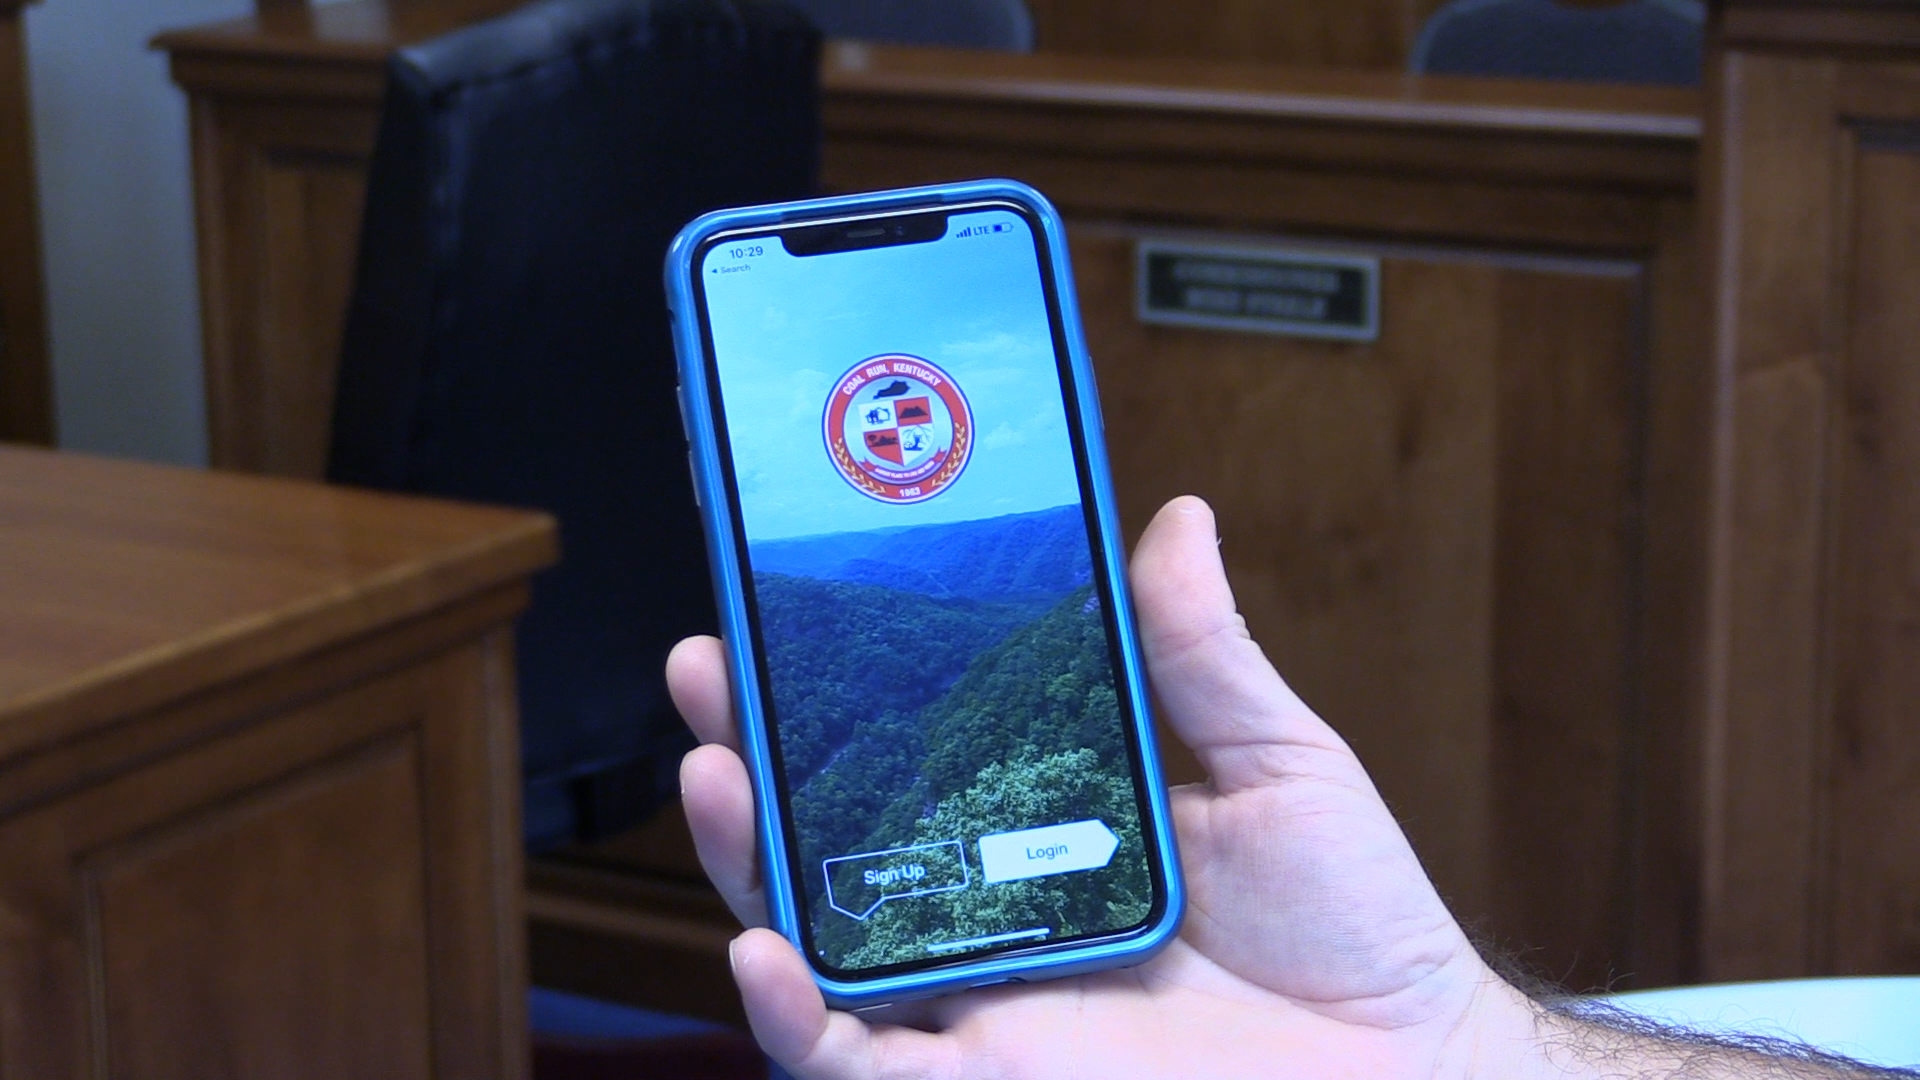 Coal Run launches app to ‘connect’ city’s residents with officials